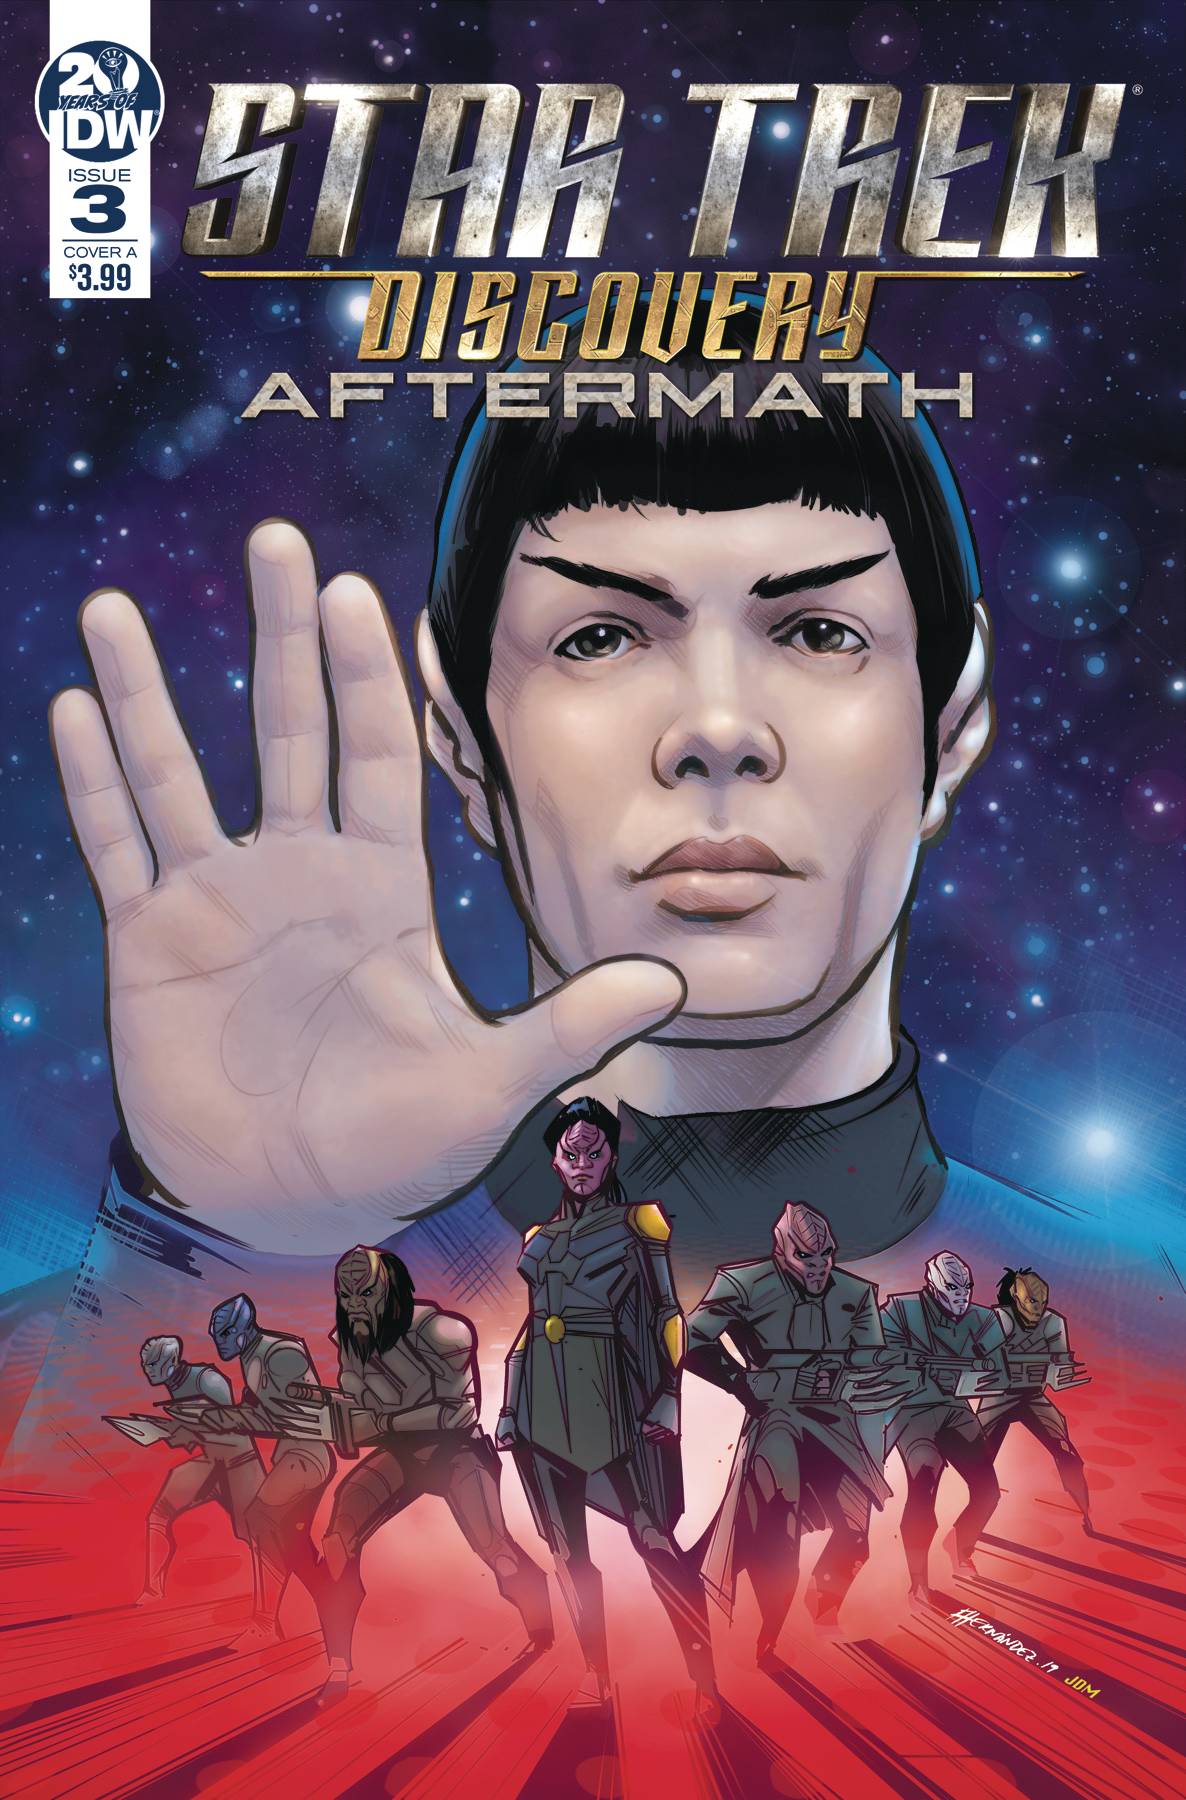 Star Trek Discovery Aftermath #3 Cover A Hernandez (Of 3)